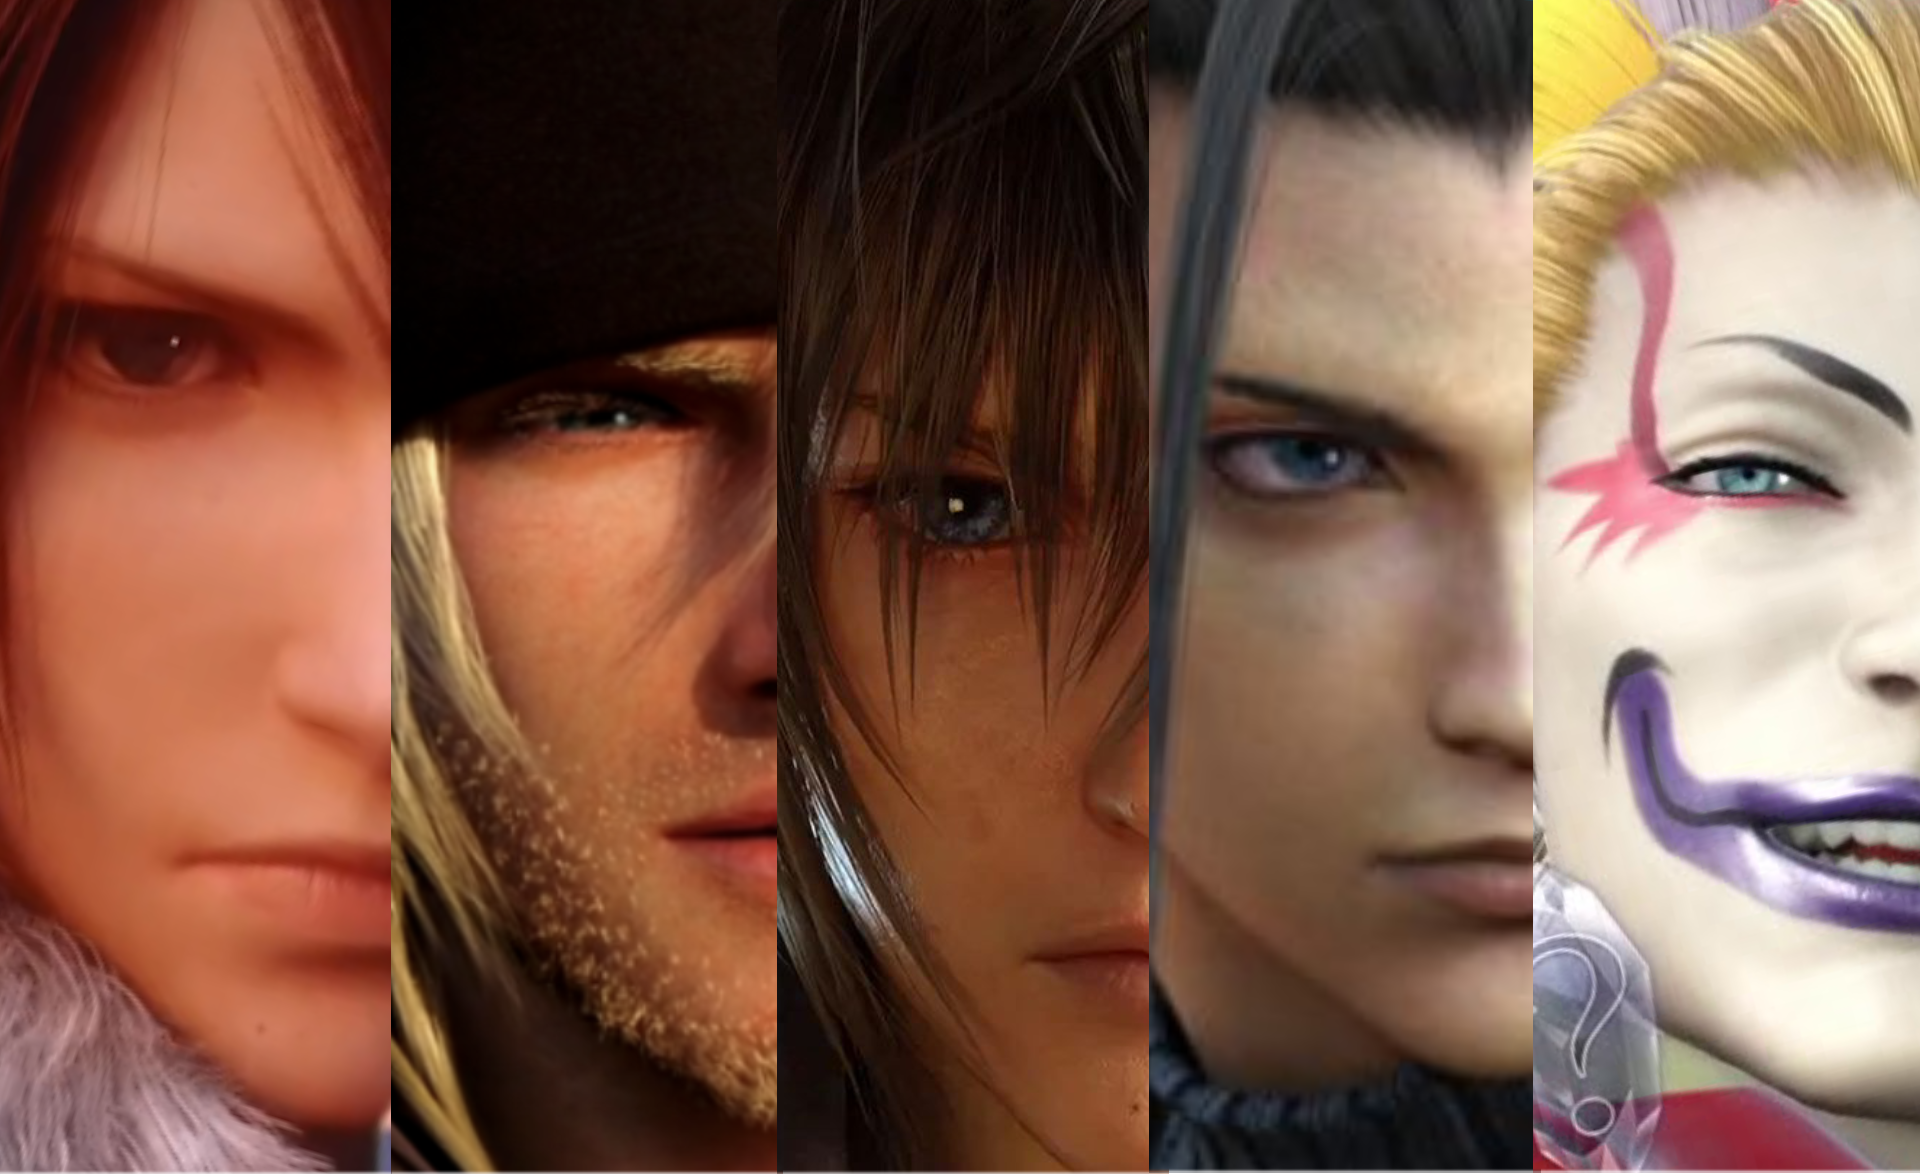 final fantasy male characters noctis